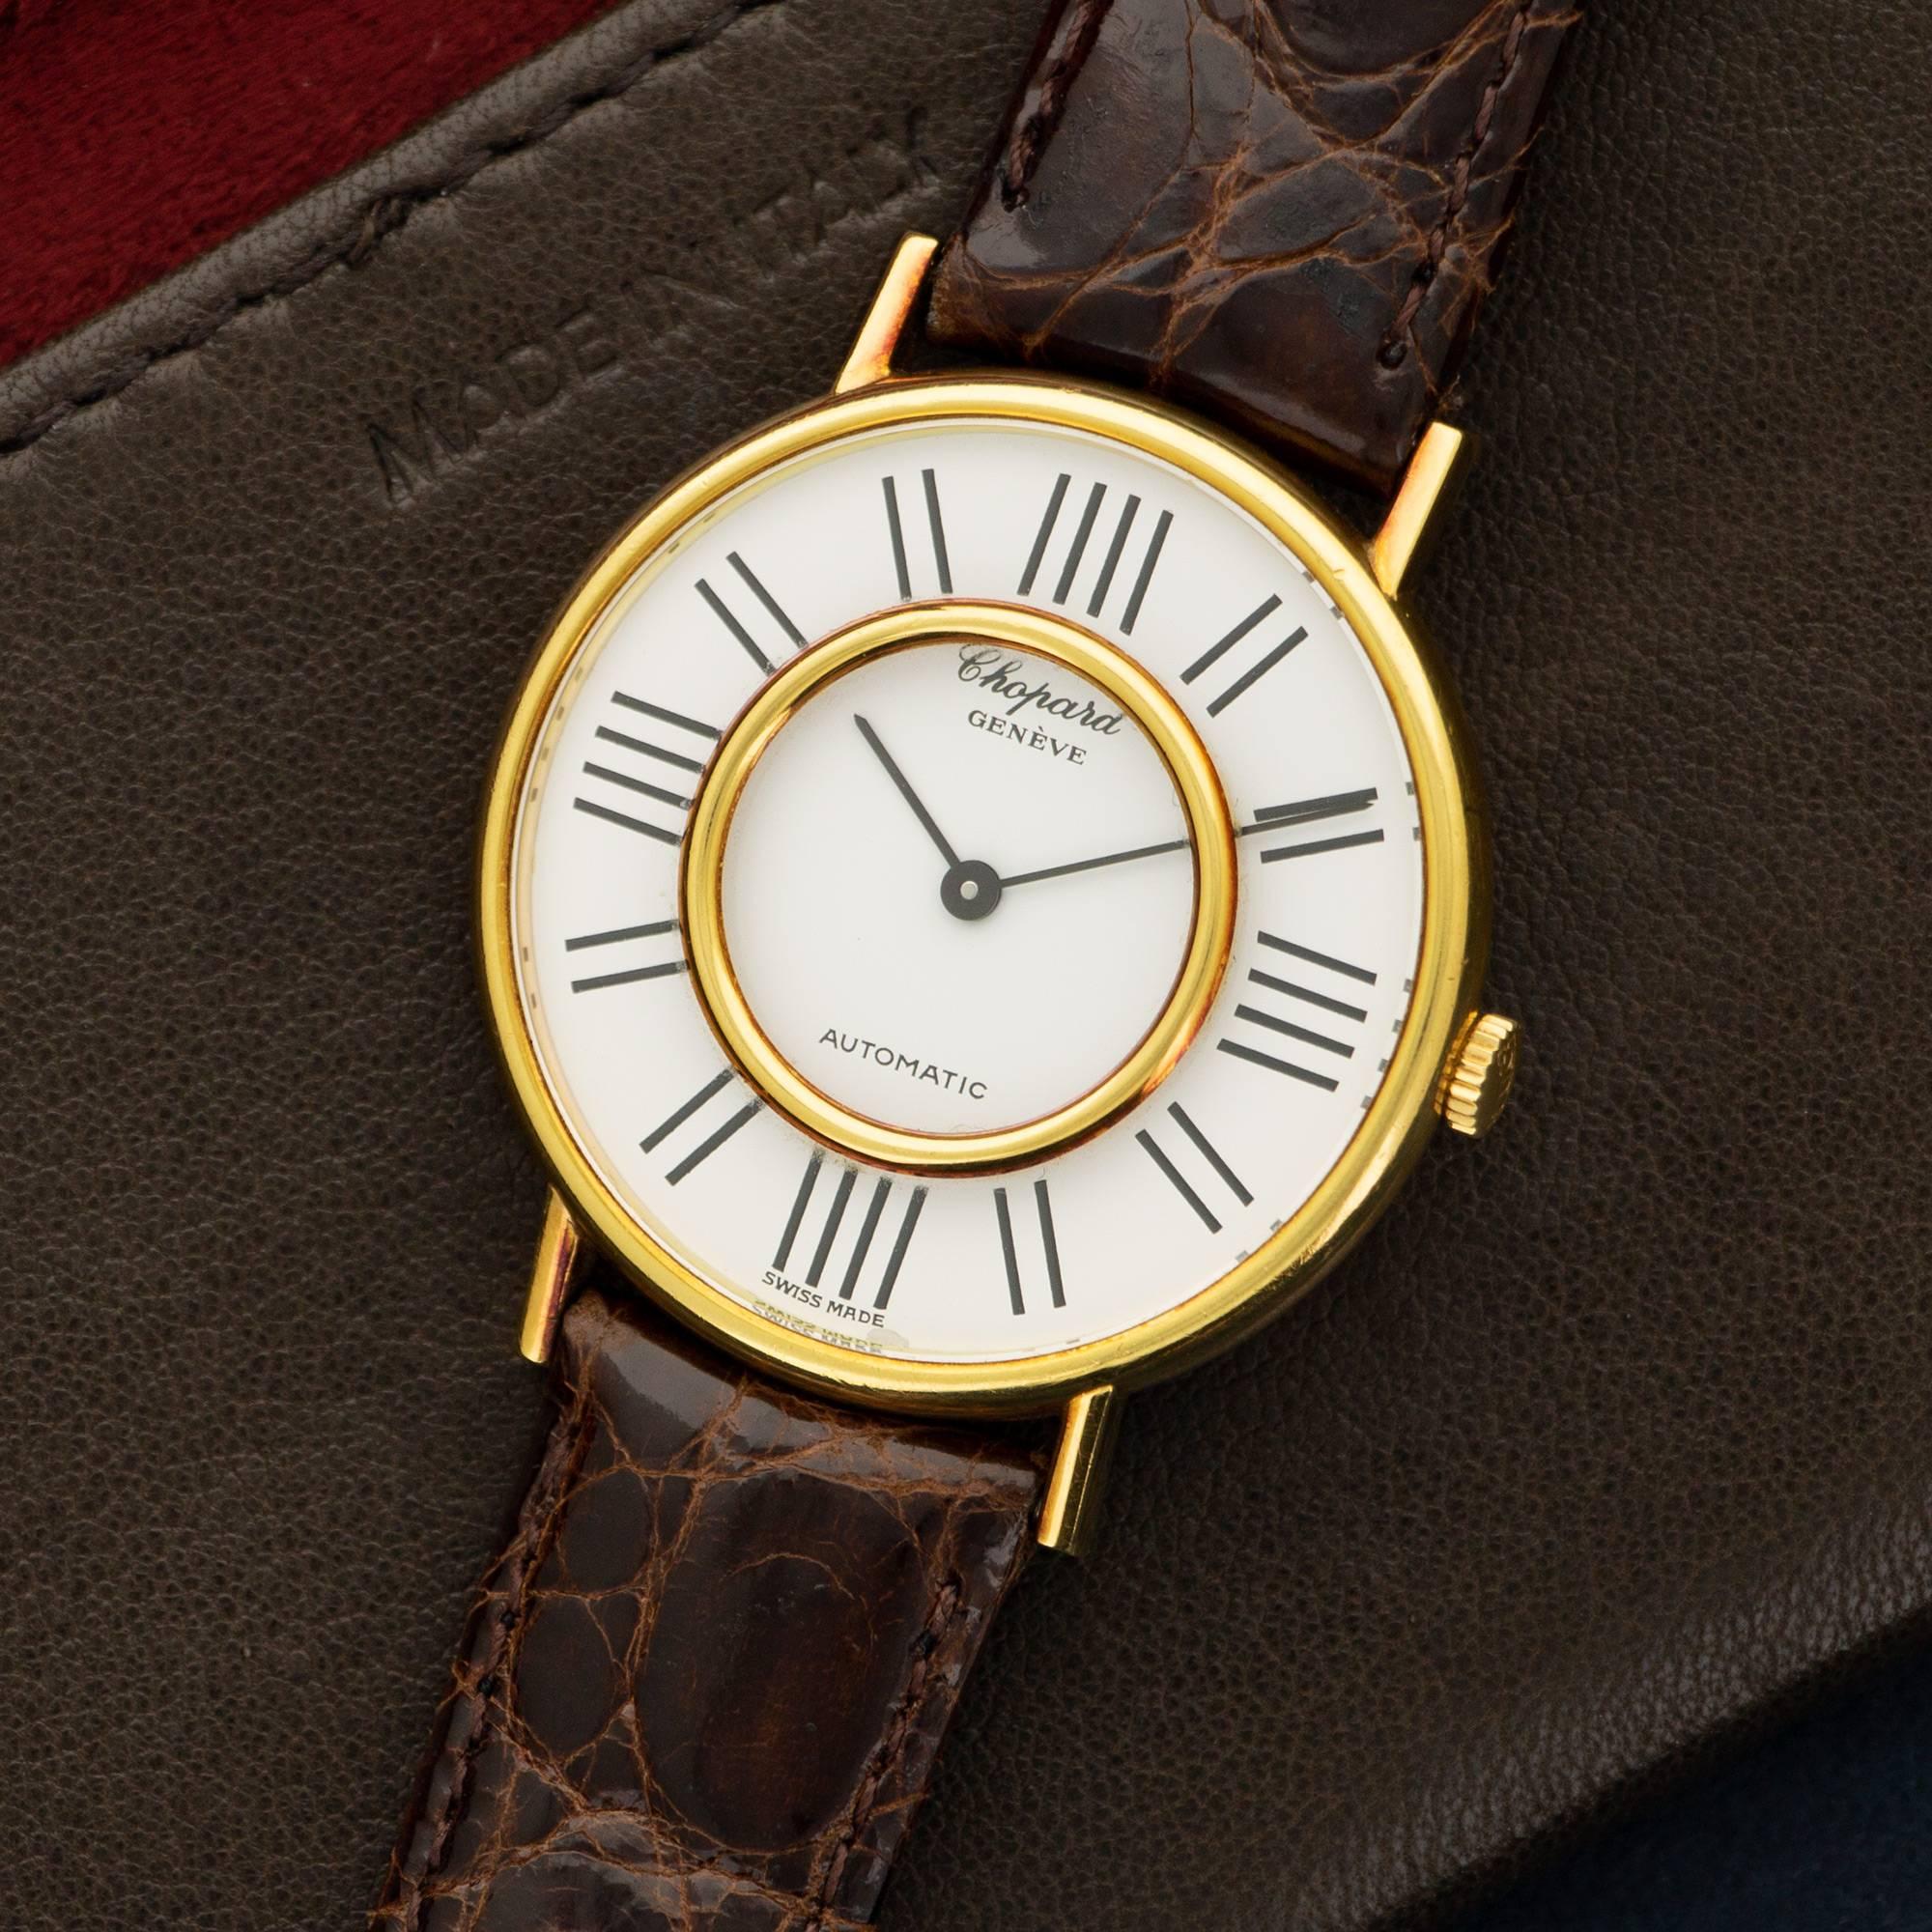 An Unusual 18k Yellow Gold Strap Watch by Chopard, Circa 1980's. 34mm Case Diameter. Automatic Movement. A Classic Shape with a Unique Dial. 